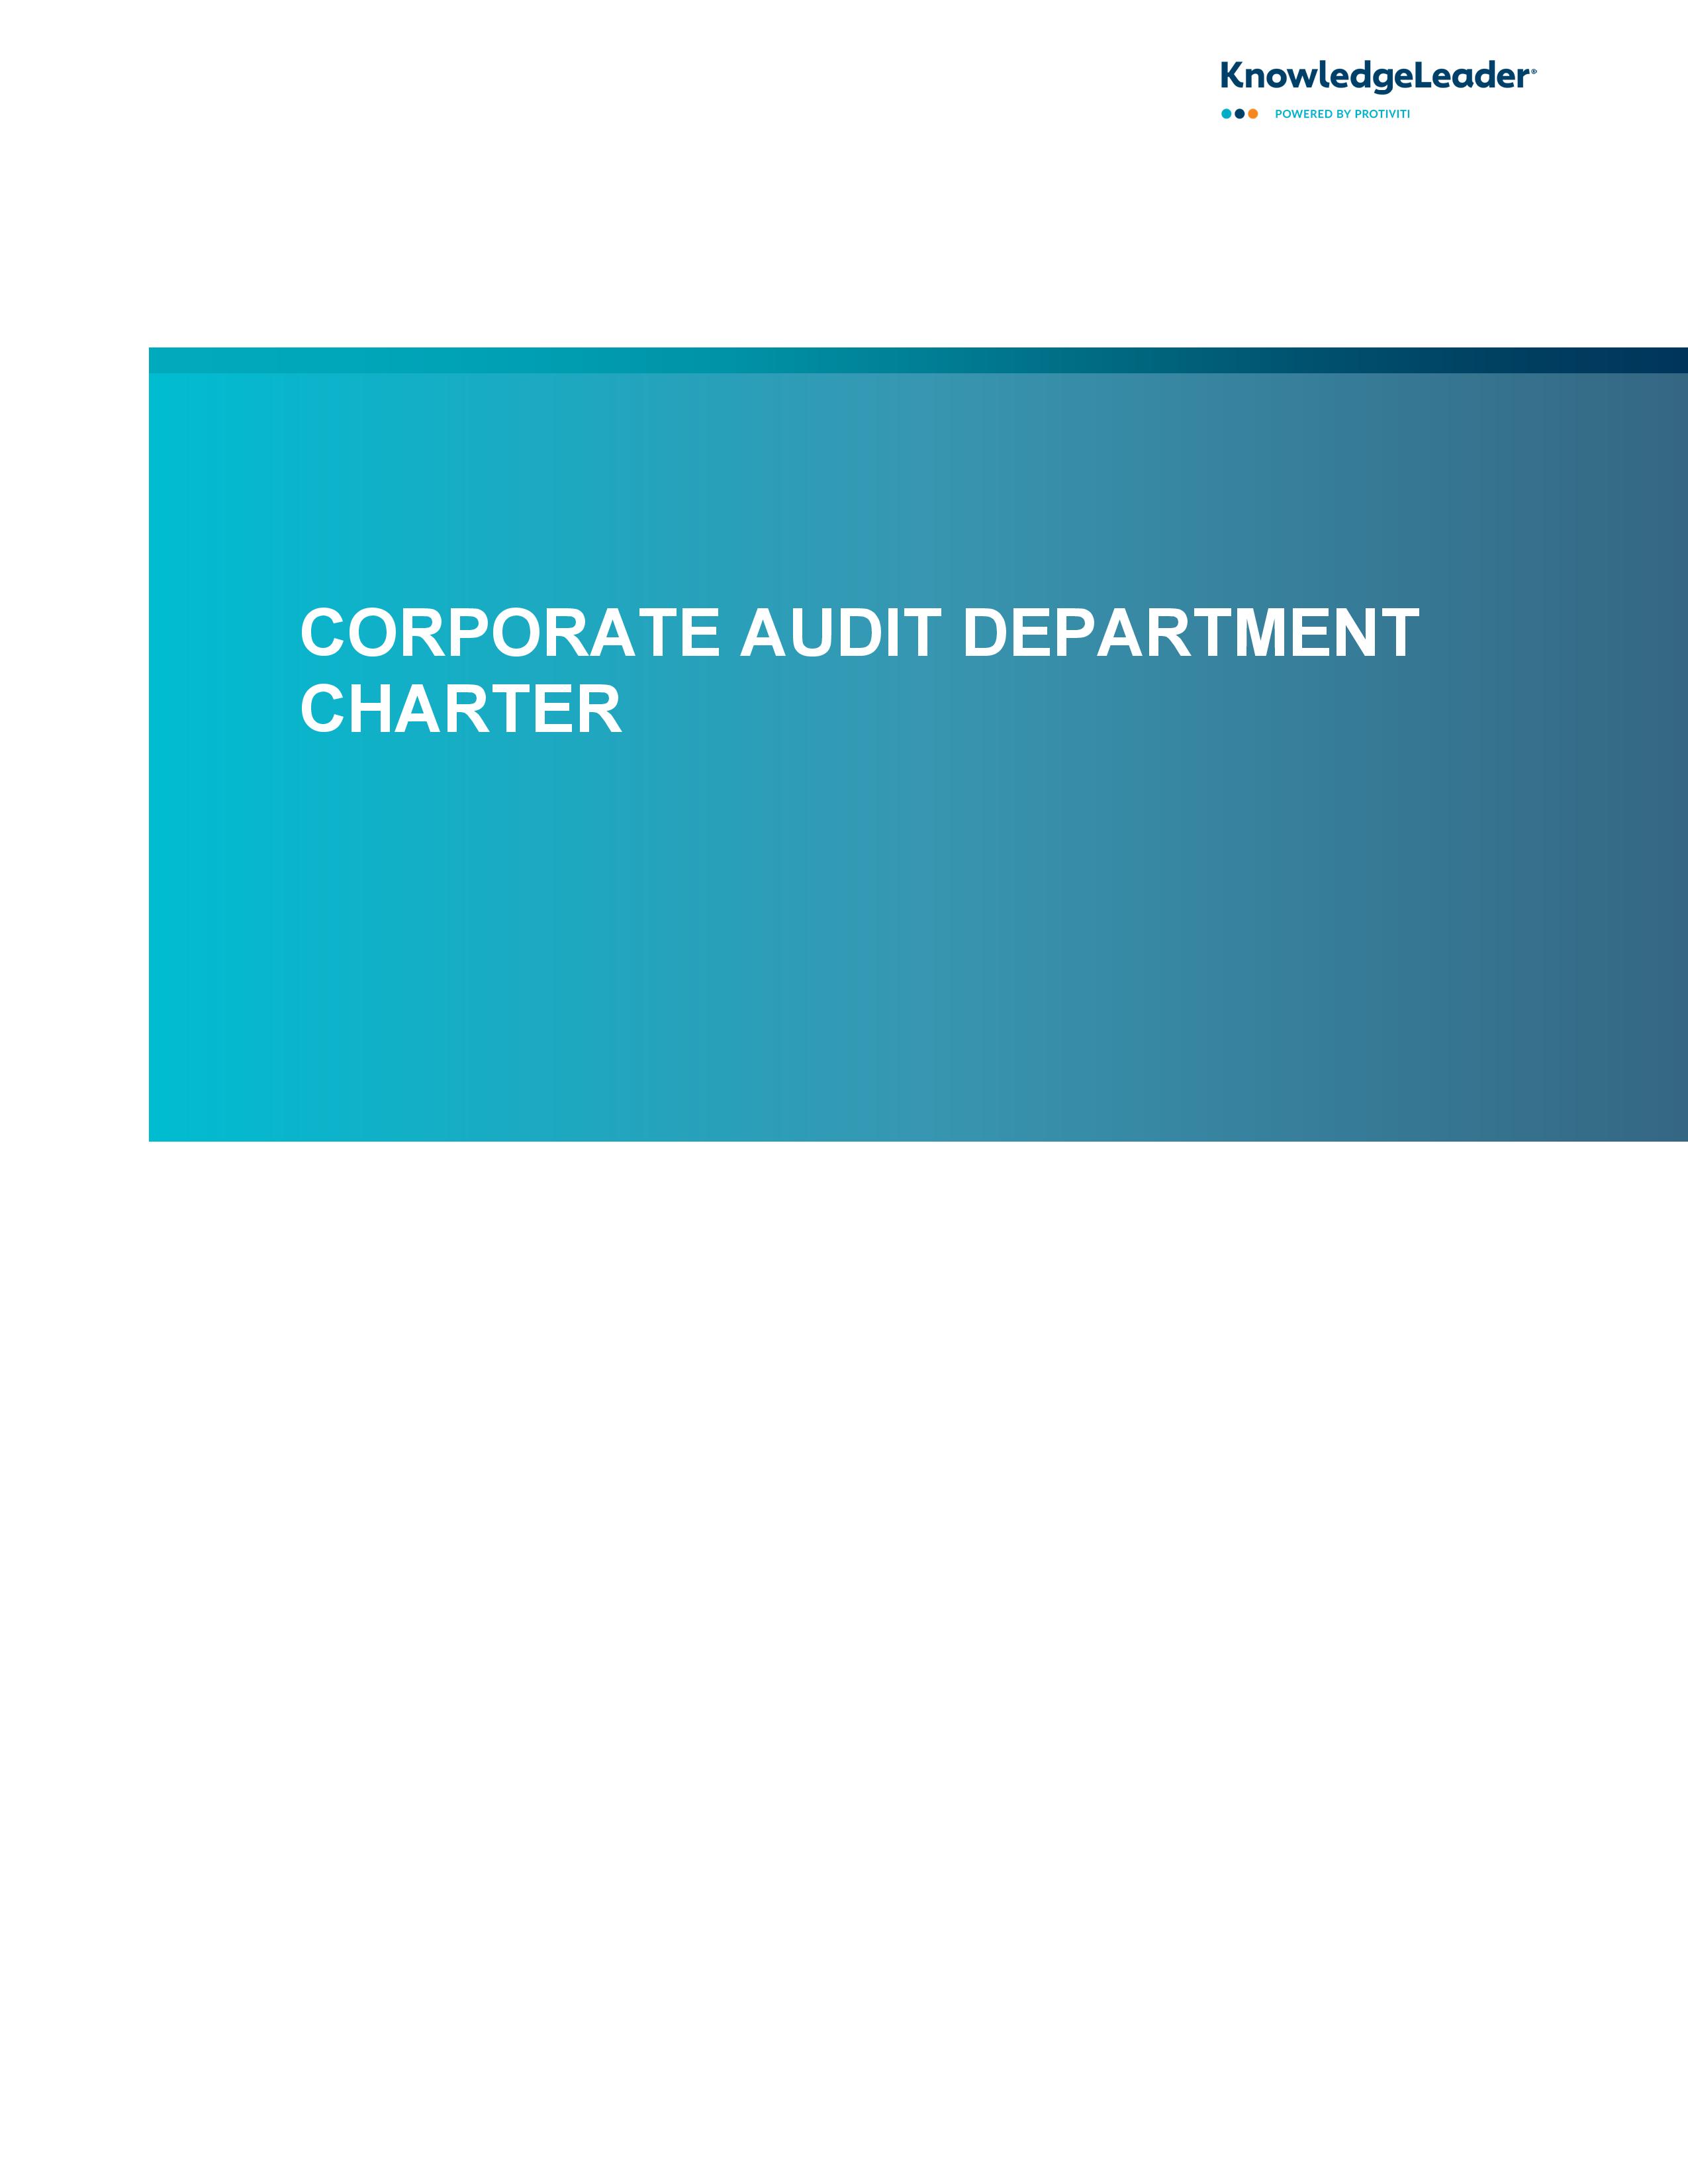 screenshot of the first page of Corporate Audit Department Charter